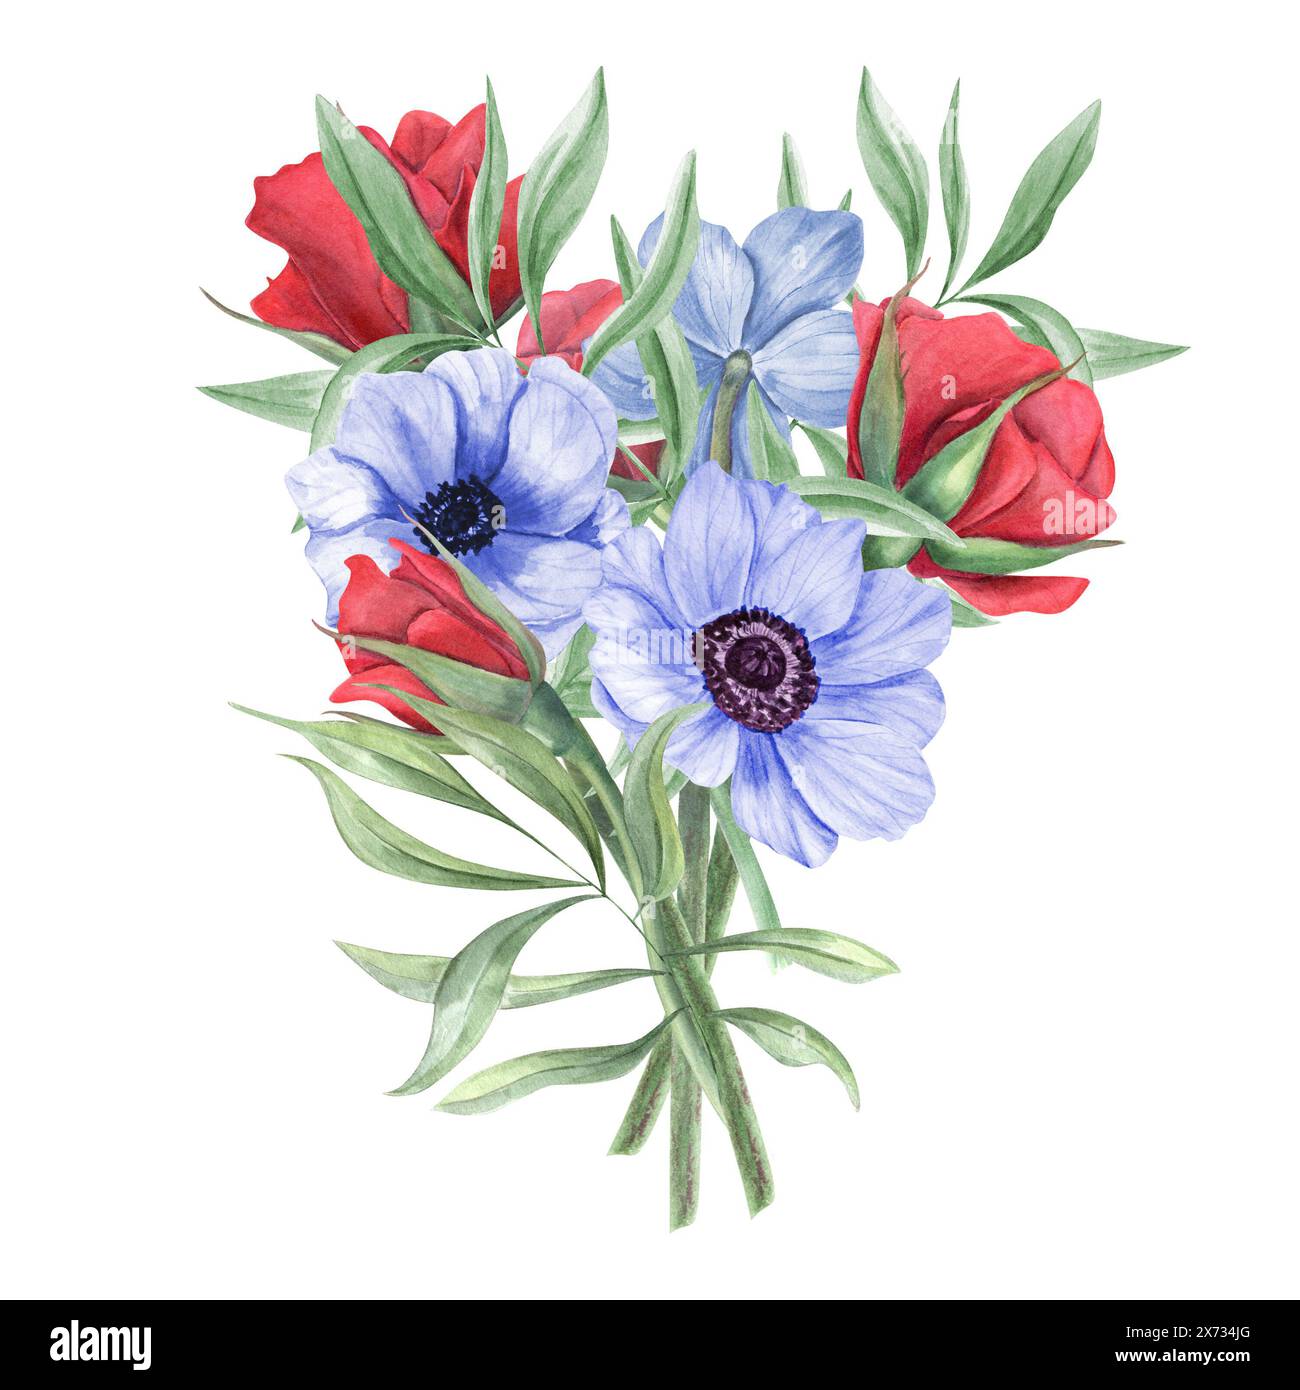 Floral bouquet in red blue colors. Roses, anemones with green eucalyptus leaves. Garden flowers. Watercolor illustration. For patriotic card Stock Photo